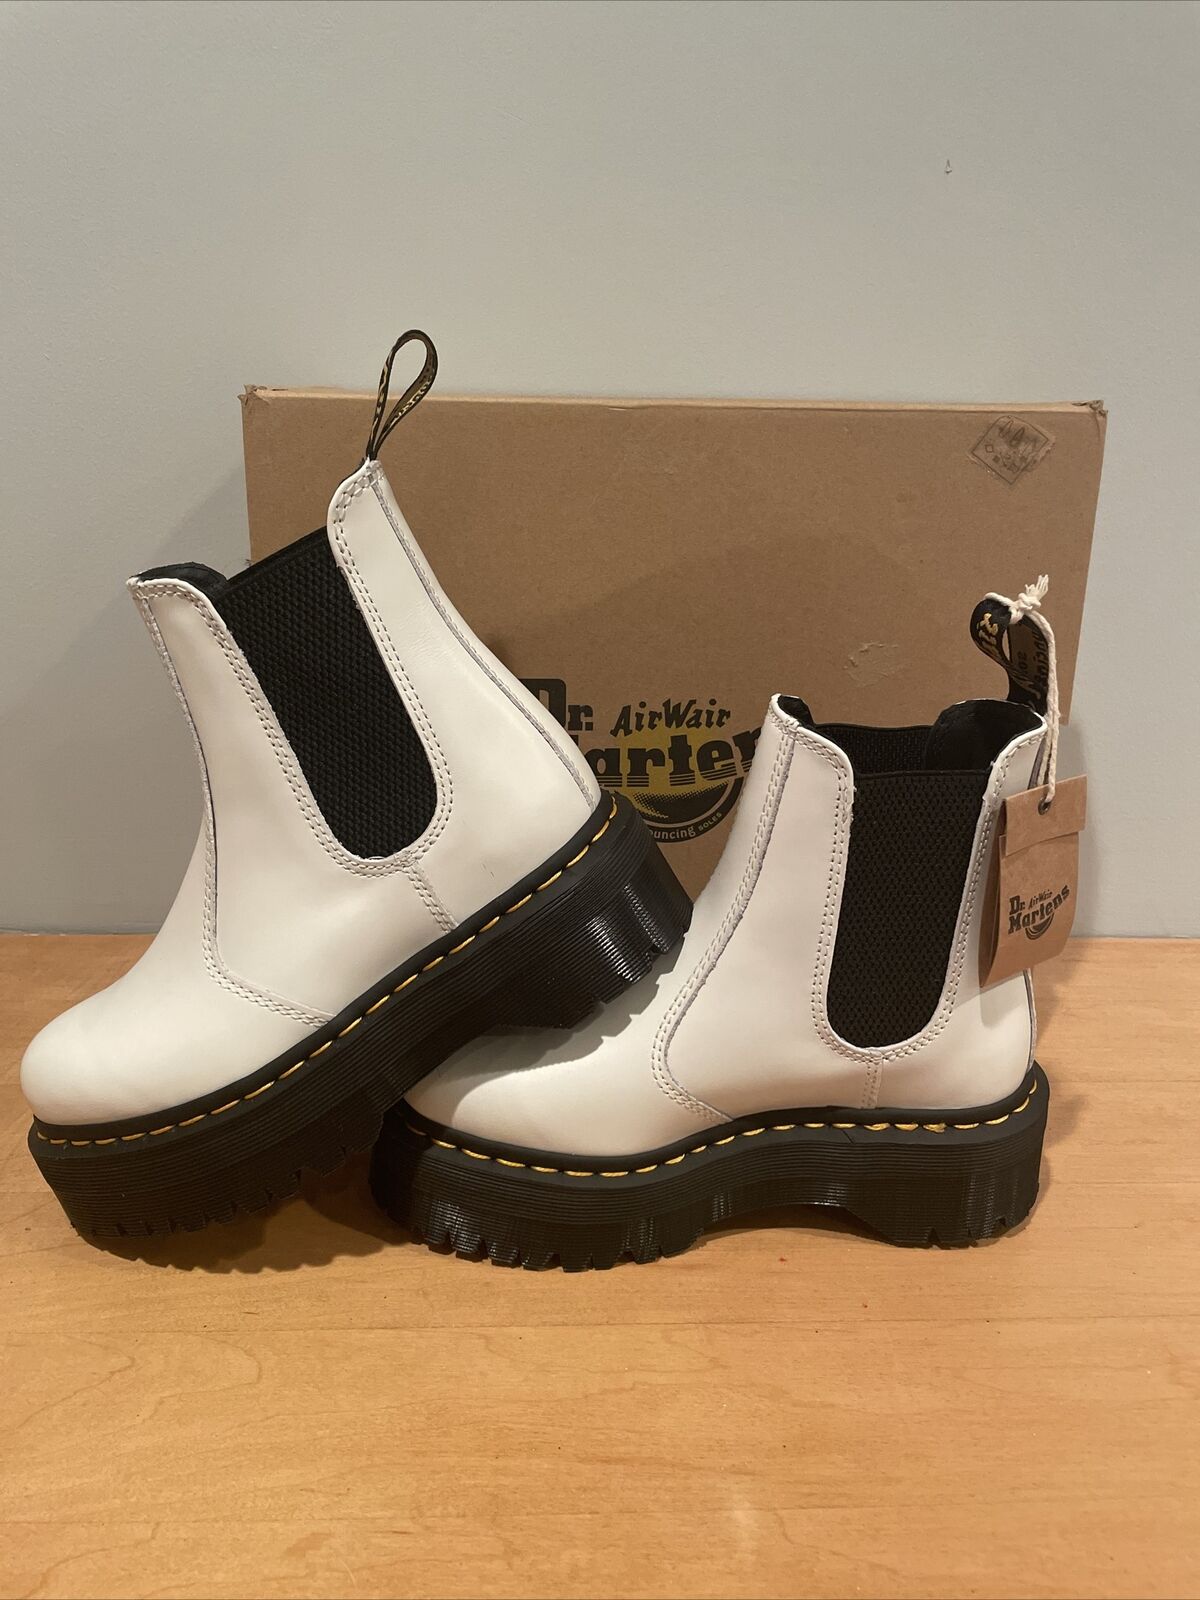 NWB- Dr. Martens 2976 Quad Retro Chelsea Boot White Smooth Leather M 4 W 5